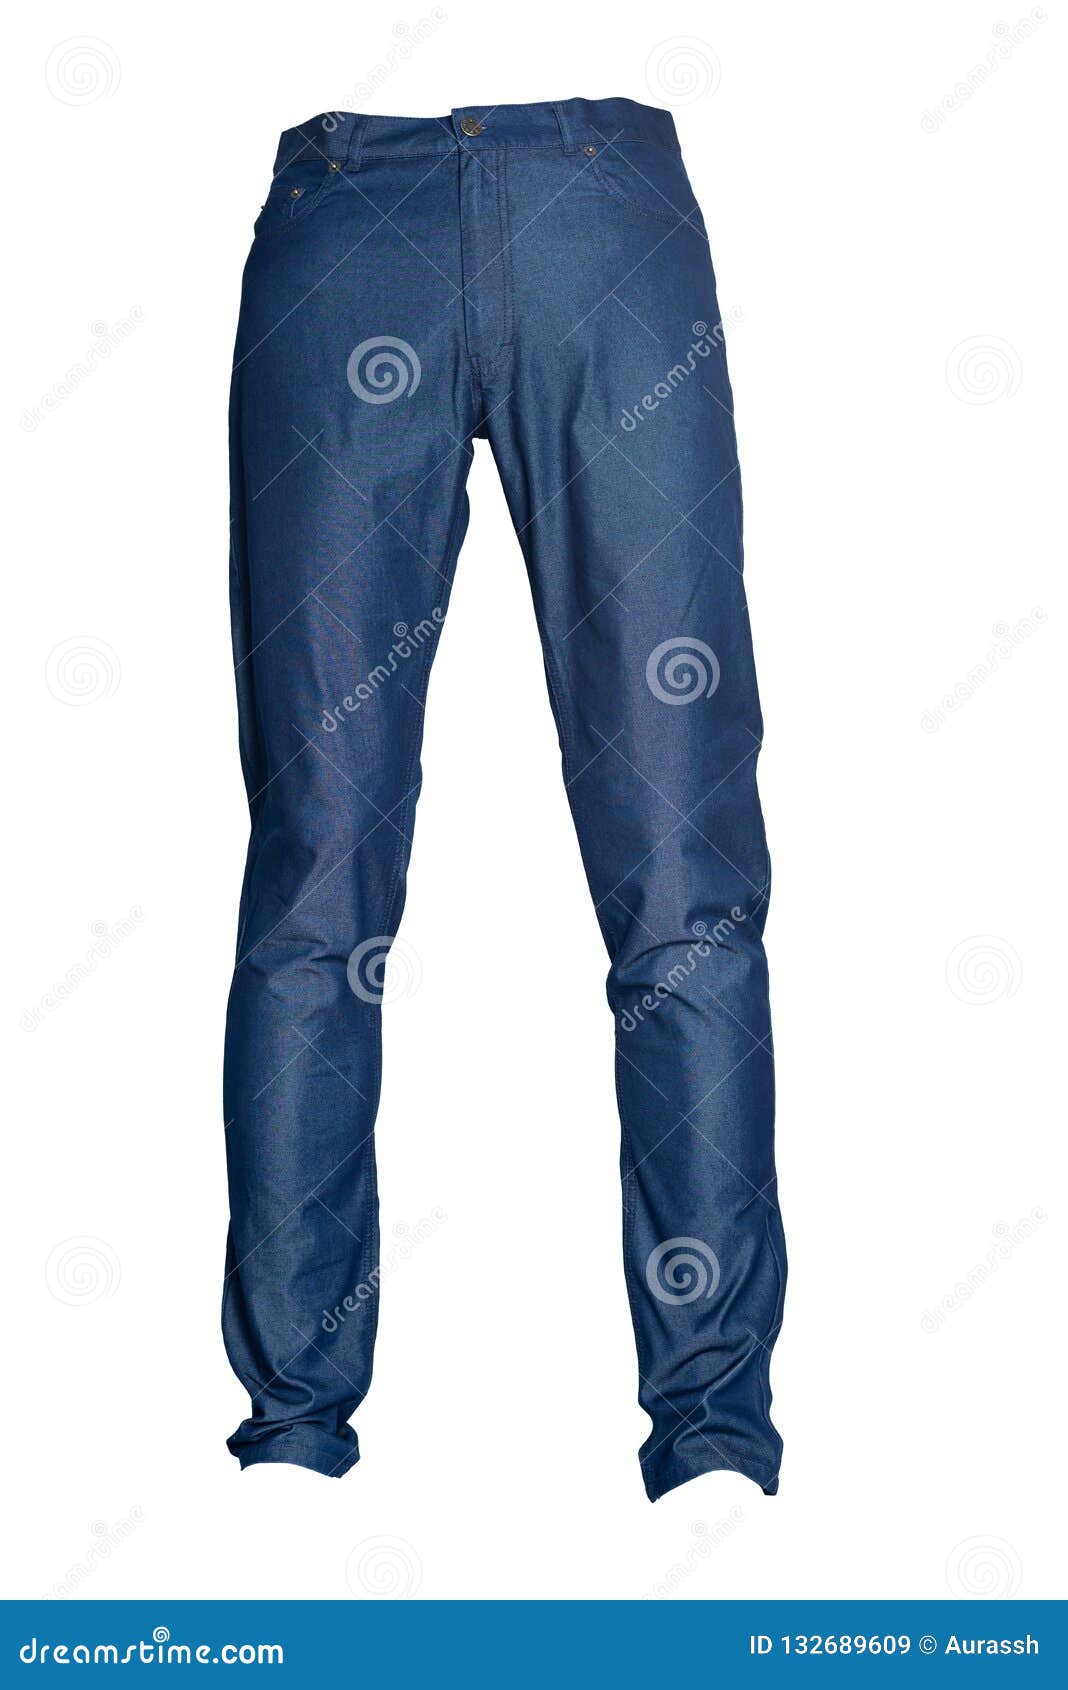 Colored Men Pants Isolated on White Background Stock Image - Image of ...